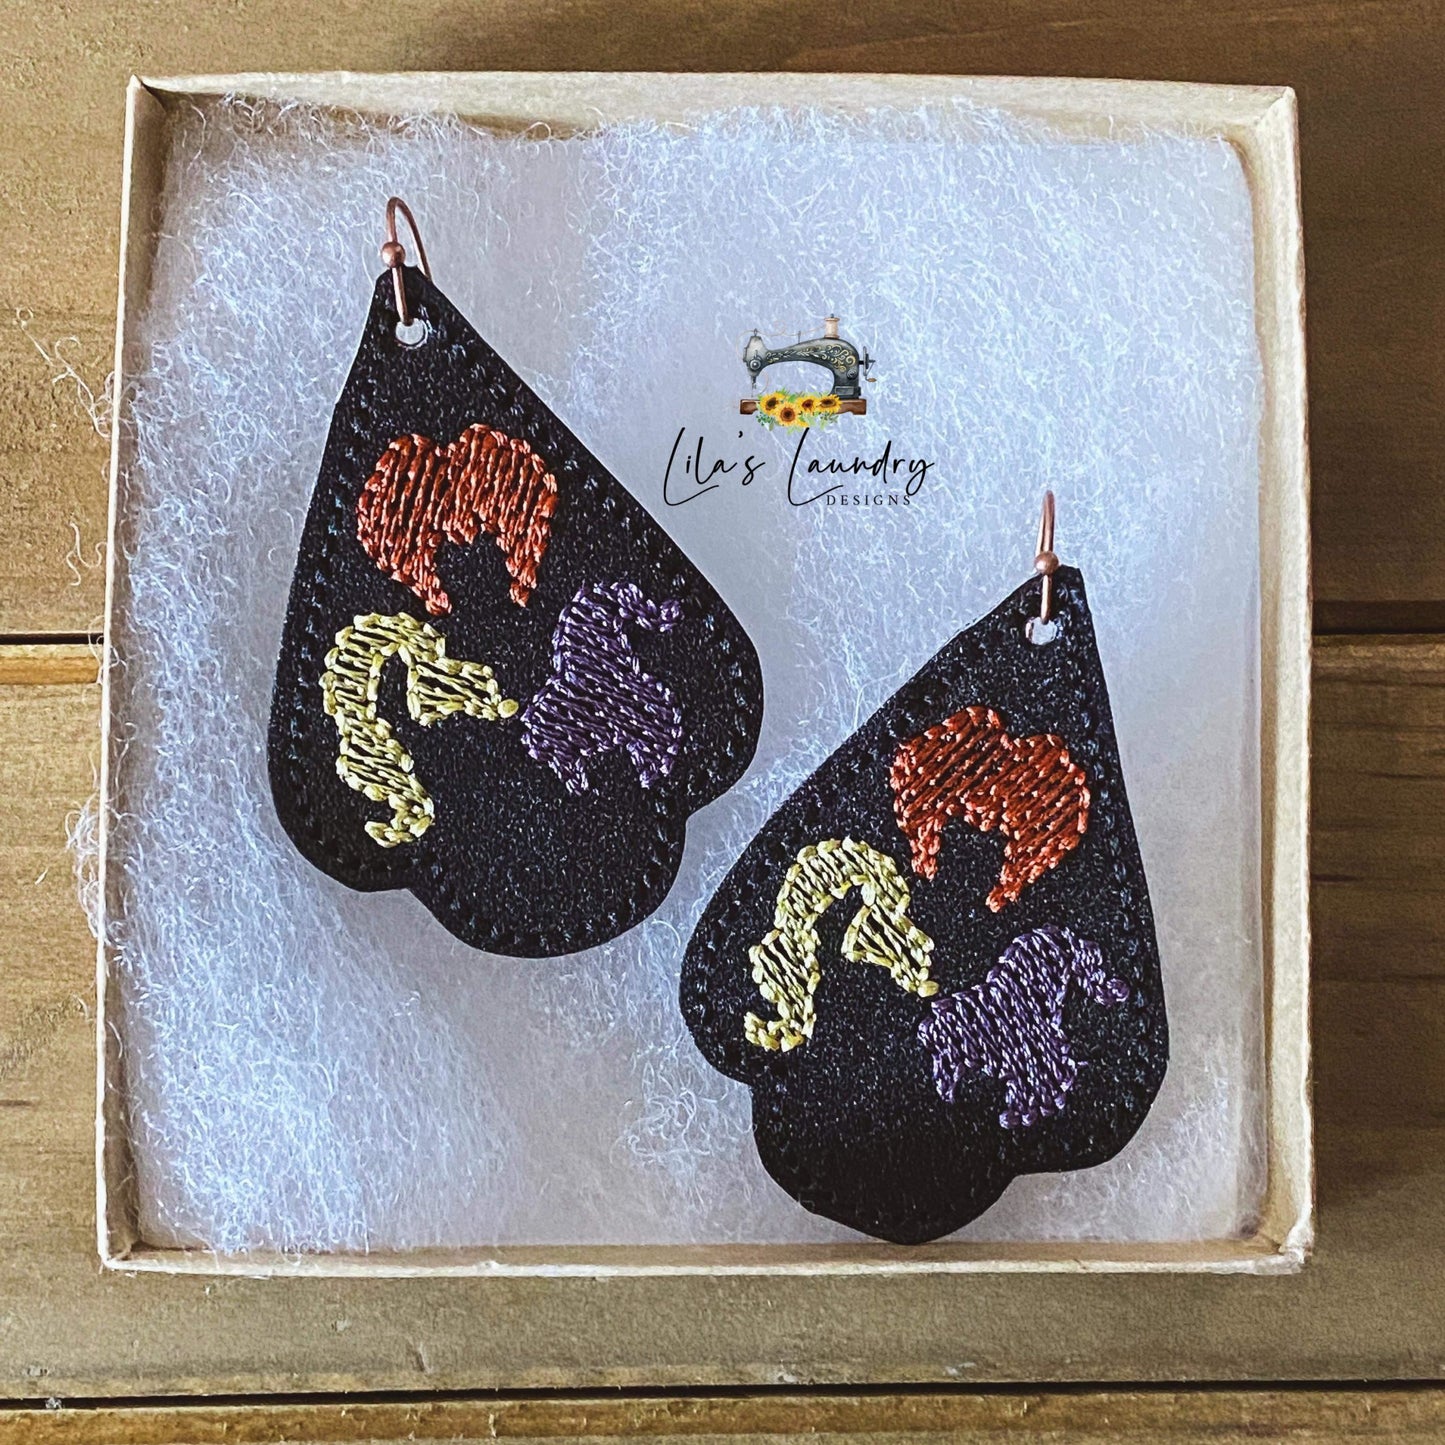 Witch Sisters Earrings - 2 inch - Digital Embroidery Design